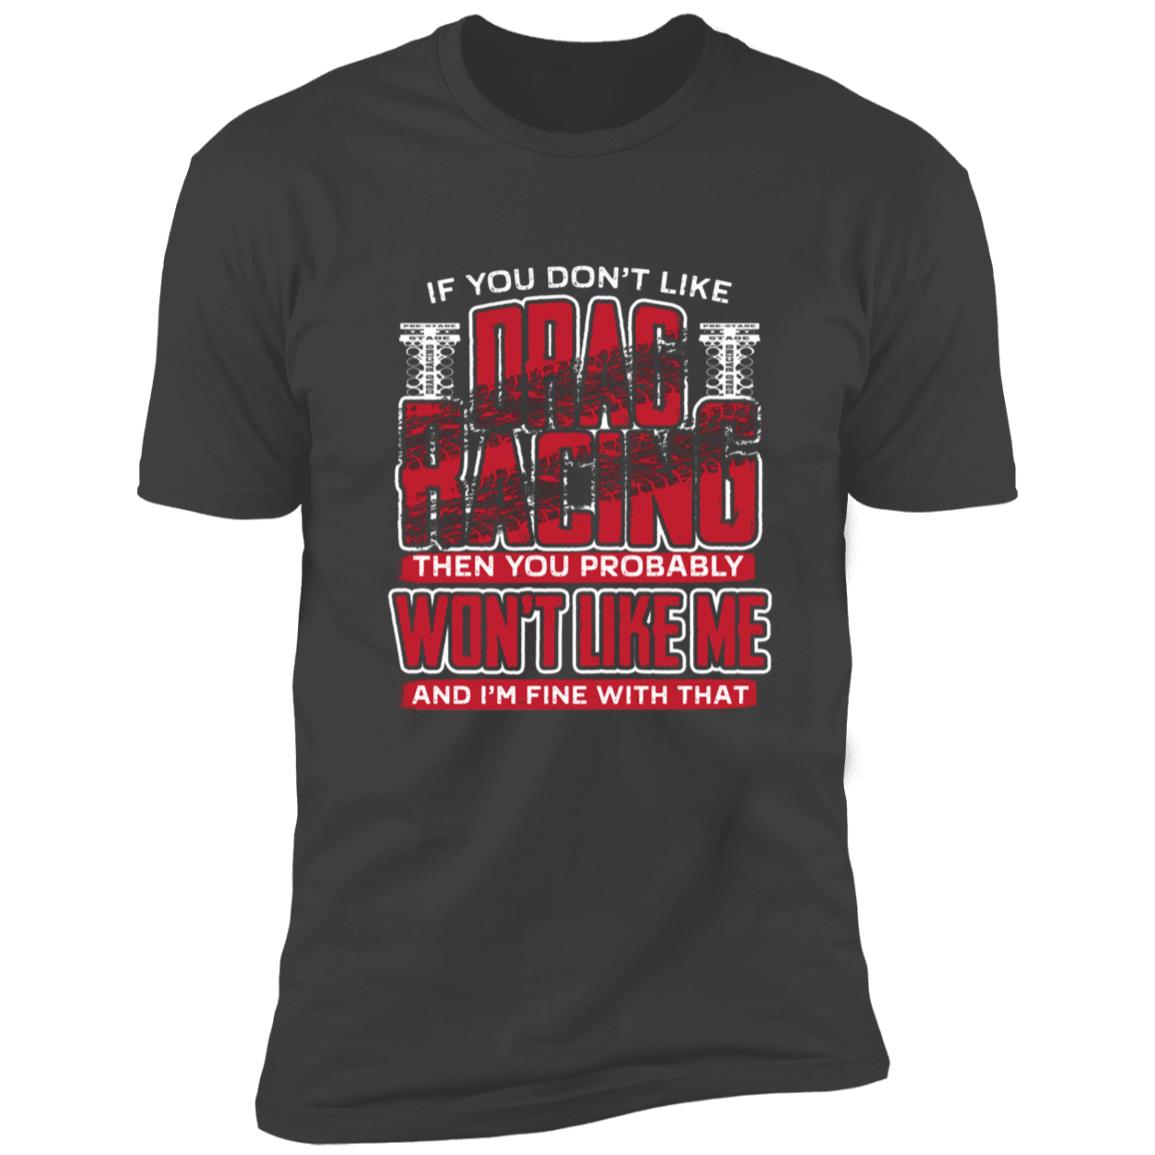 If You Don't Like Drag Racing Premium Short Sleeve Tee (Closeout)